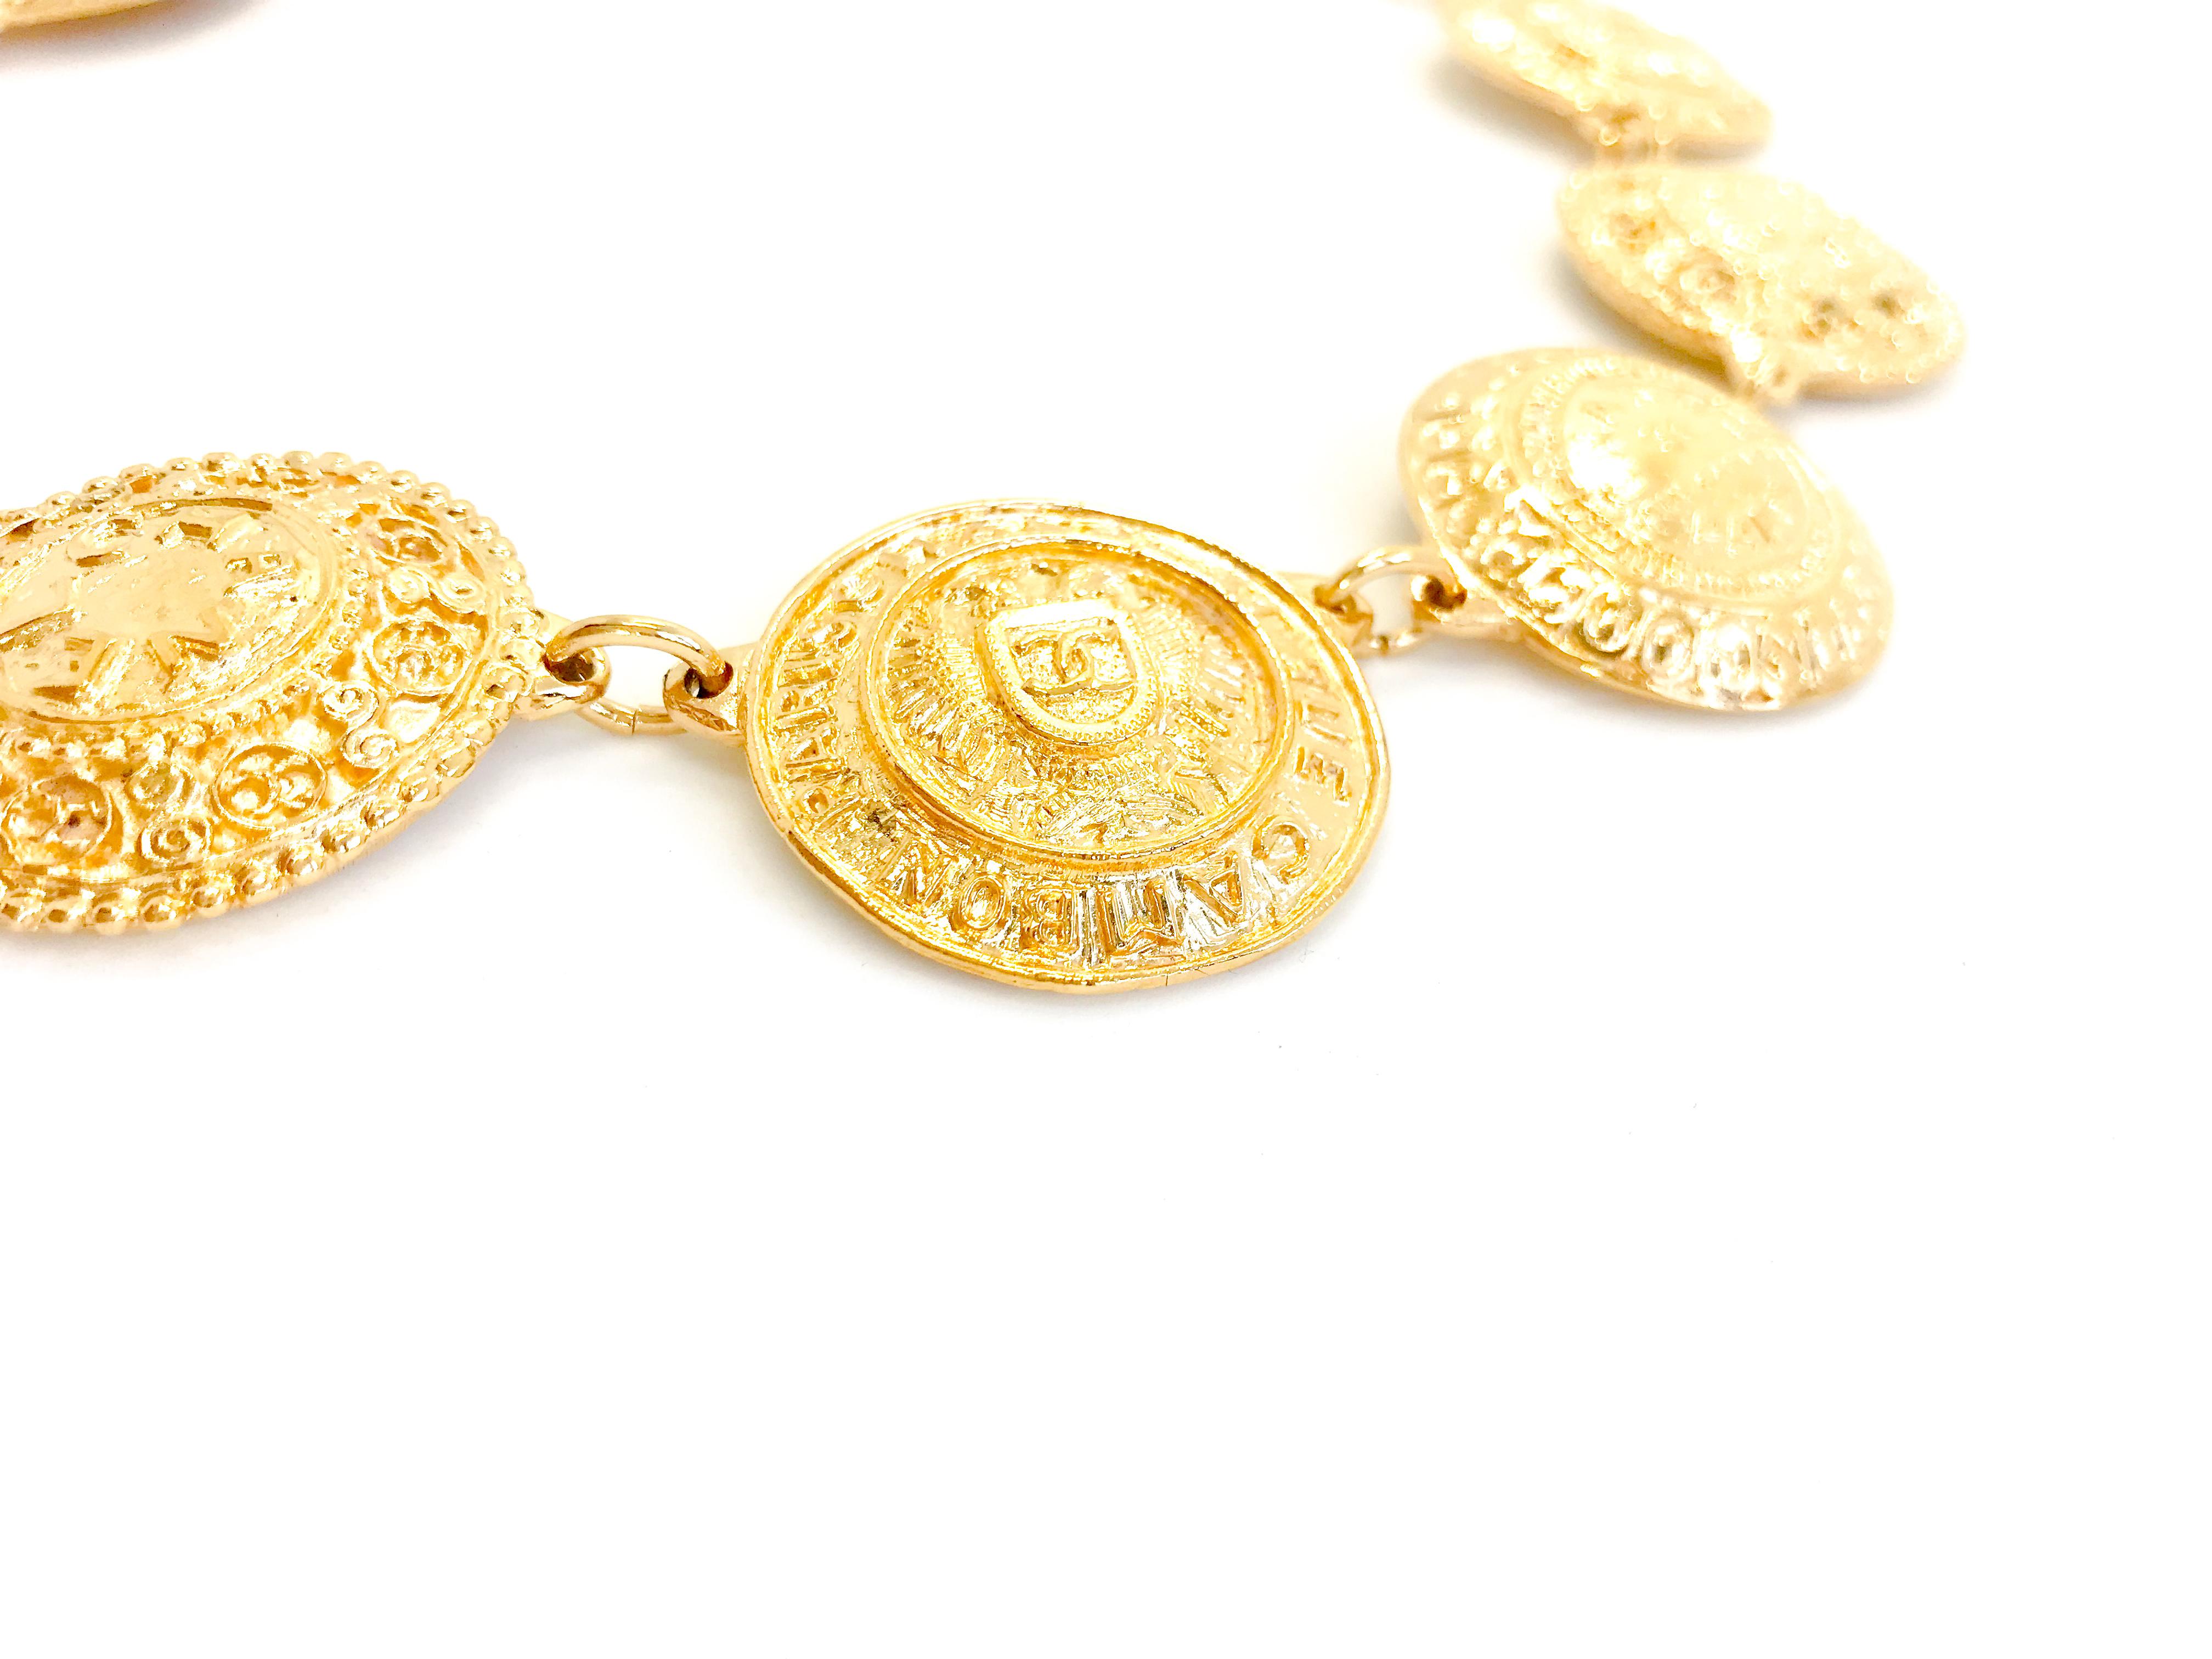 Chanel 1980s Vintage Medallion Necklace In Good Condition For Sale In London, GB